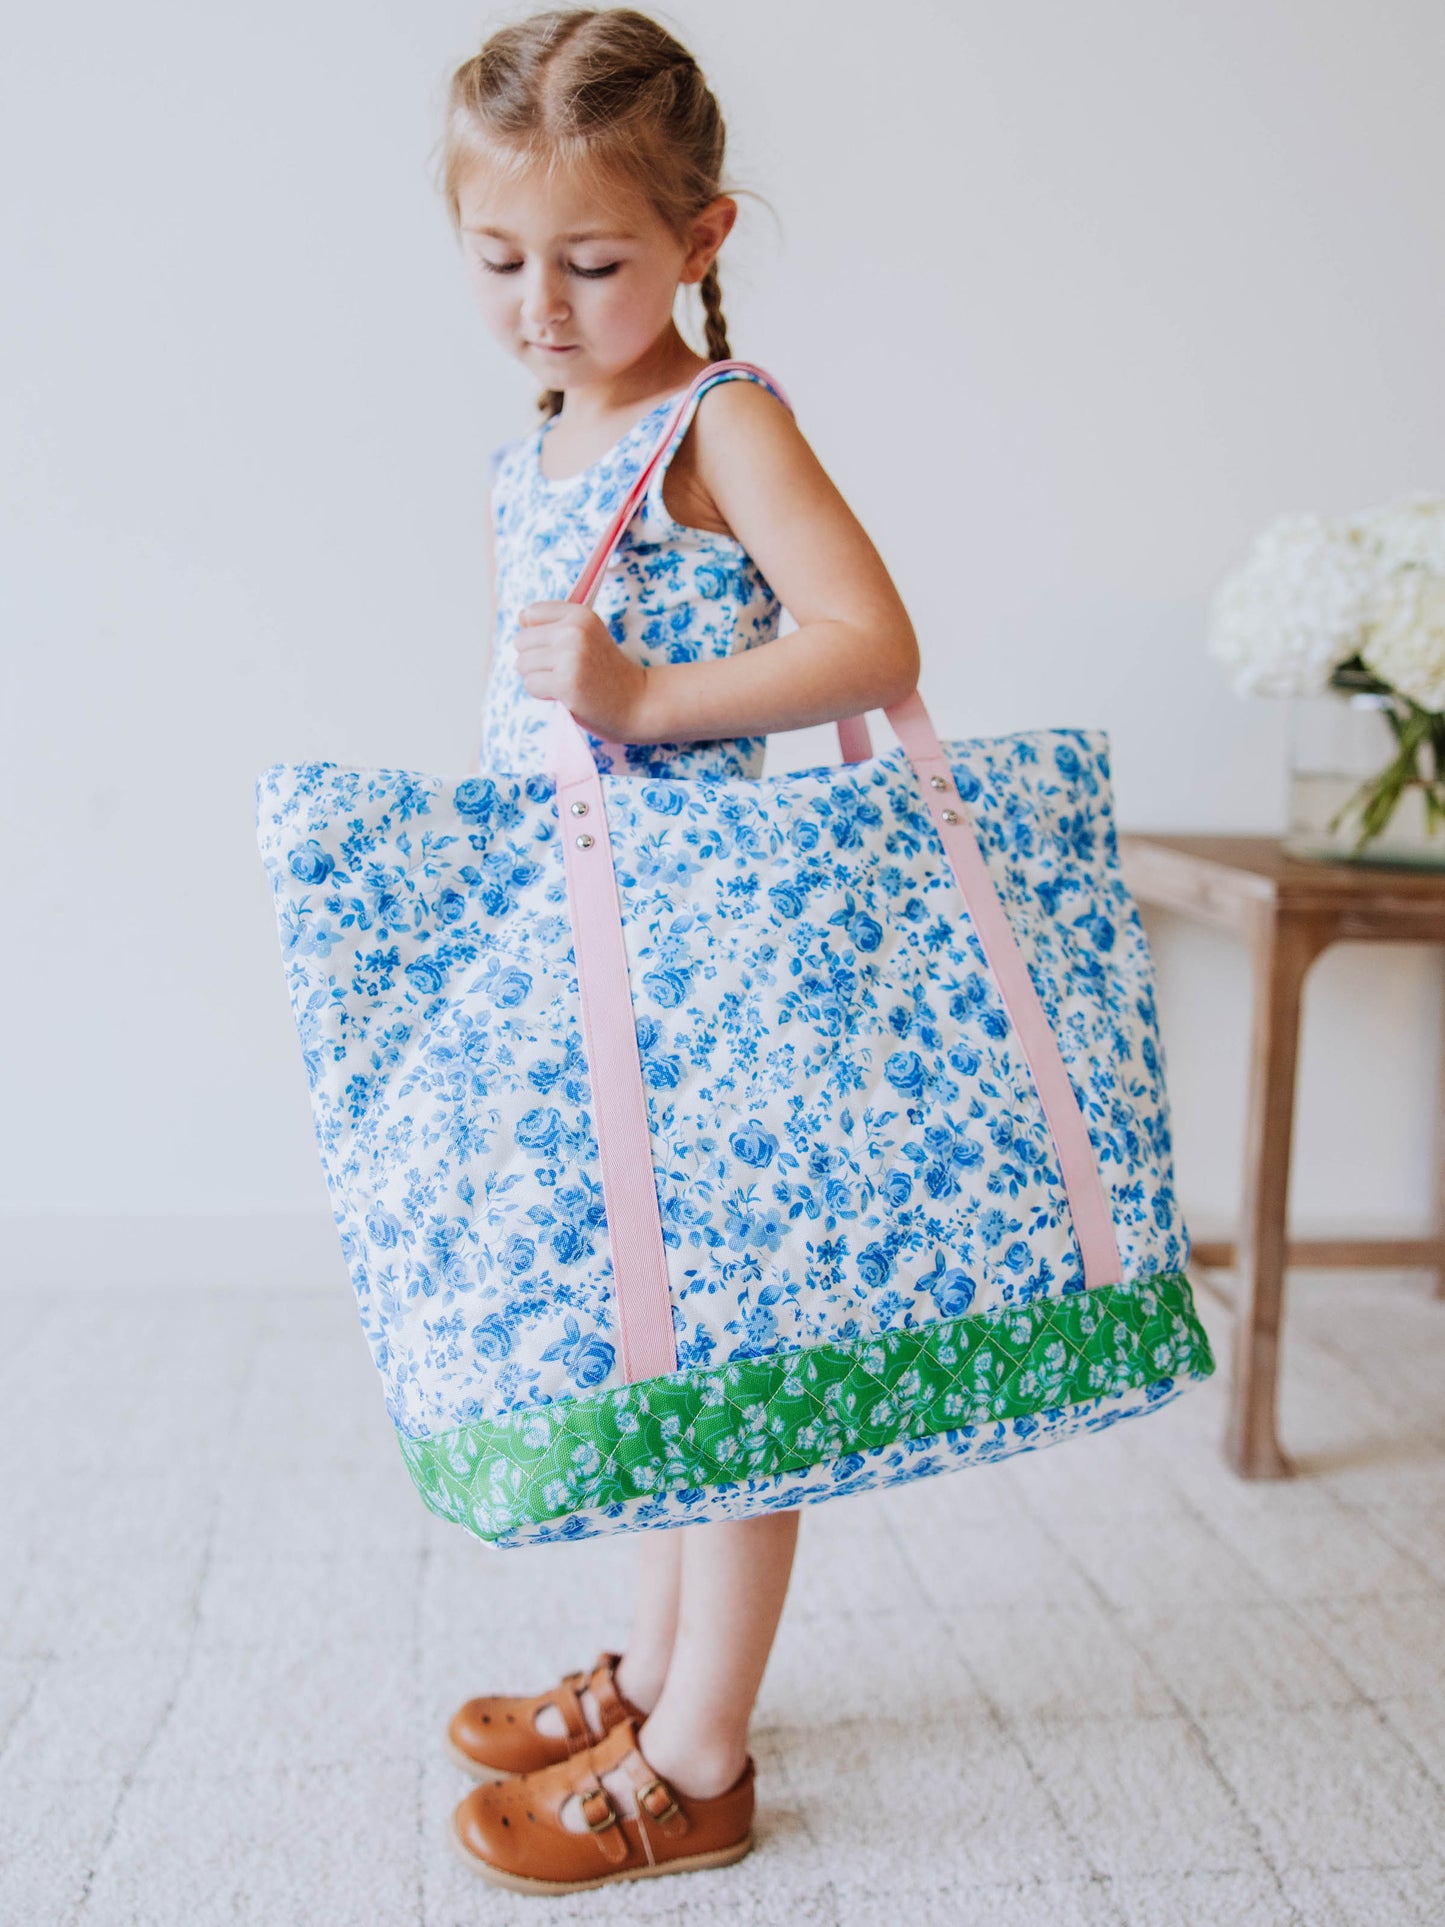 Quilted Tote - Blooming Blues